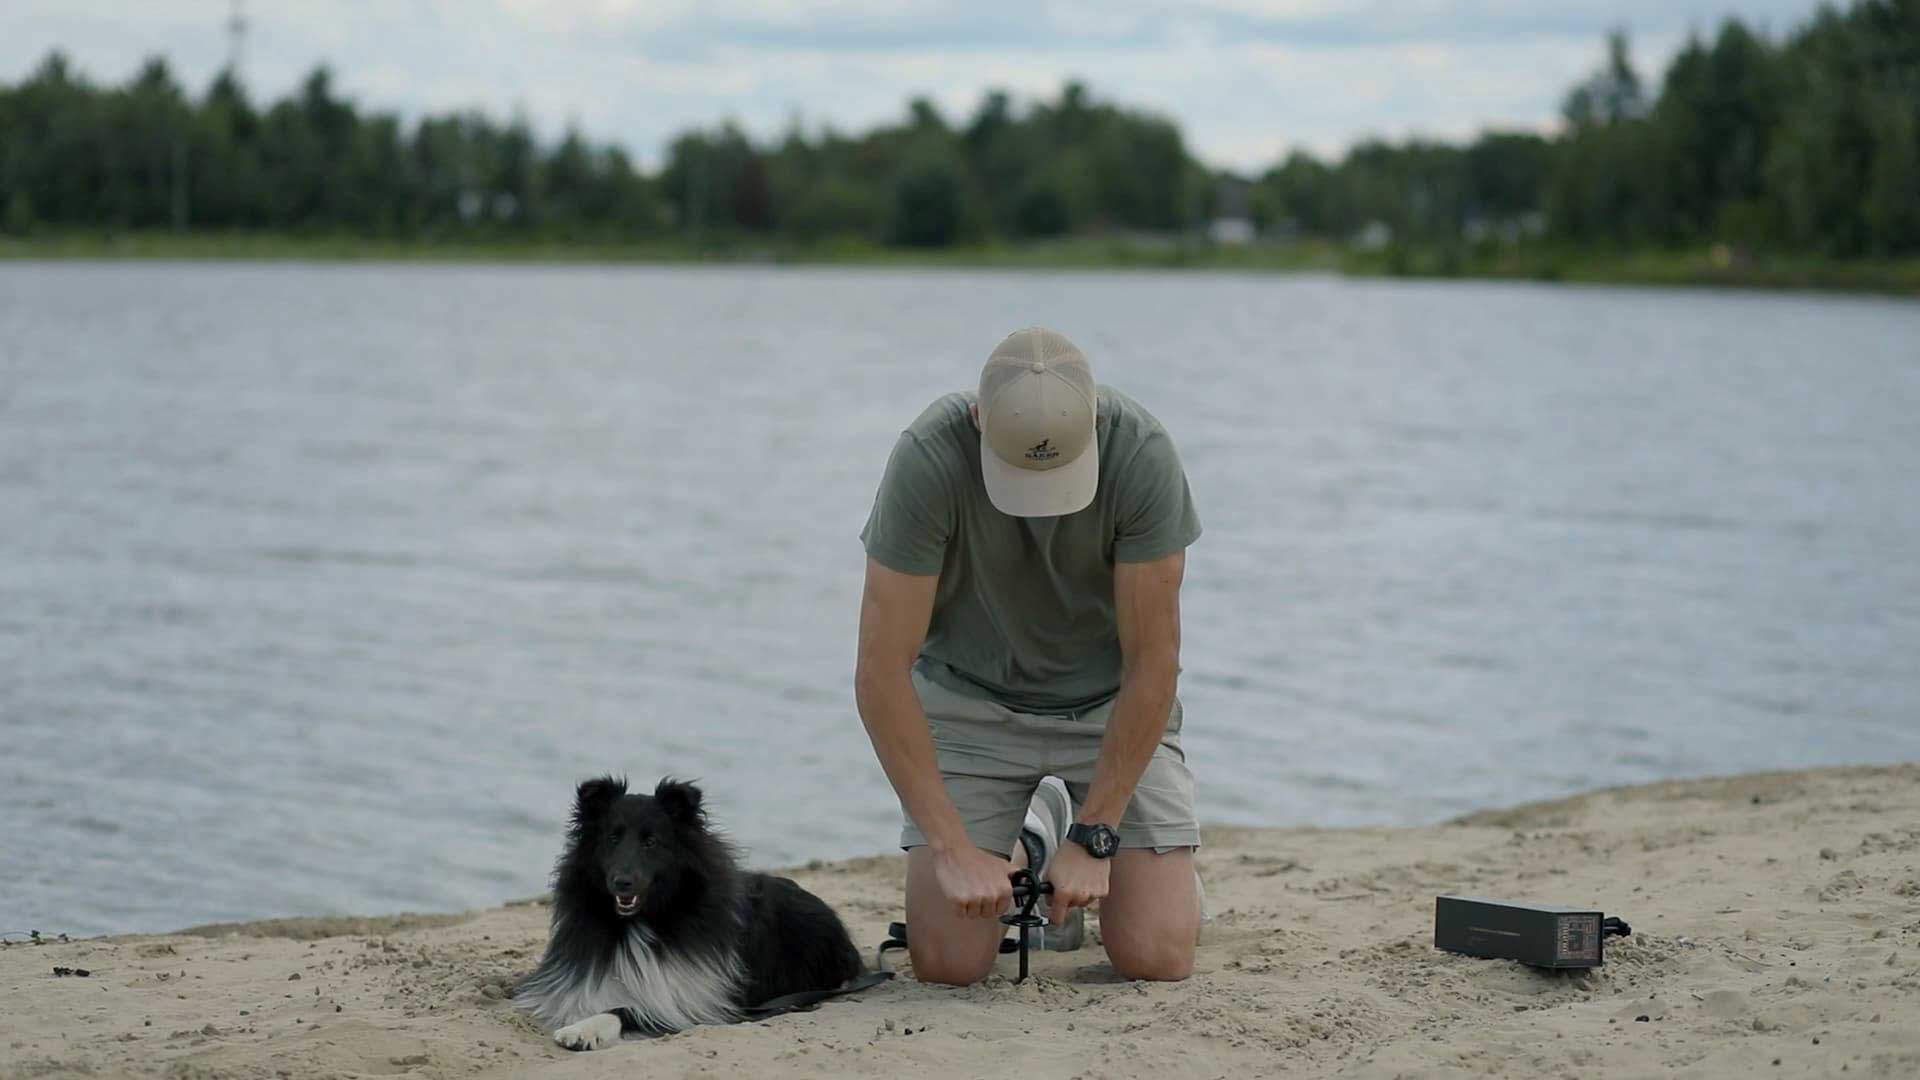 Saker founder installing the gravity dog tie out stake in the sand at the beach